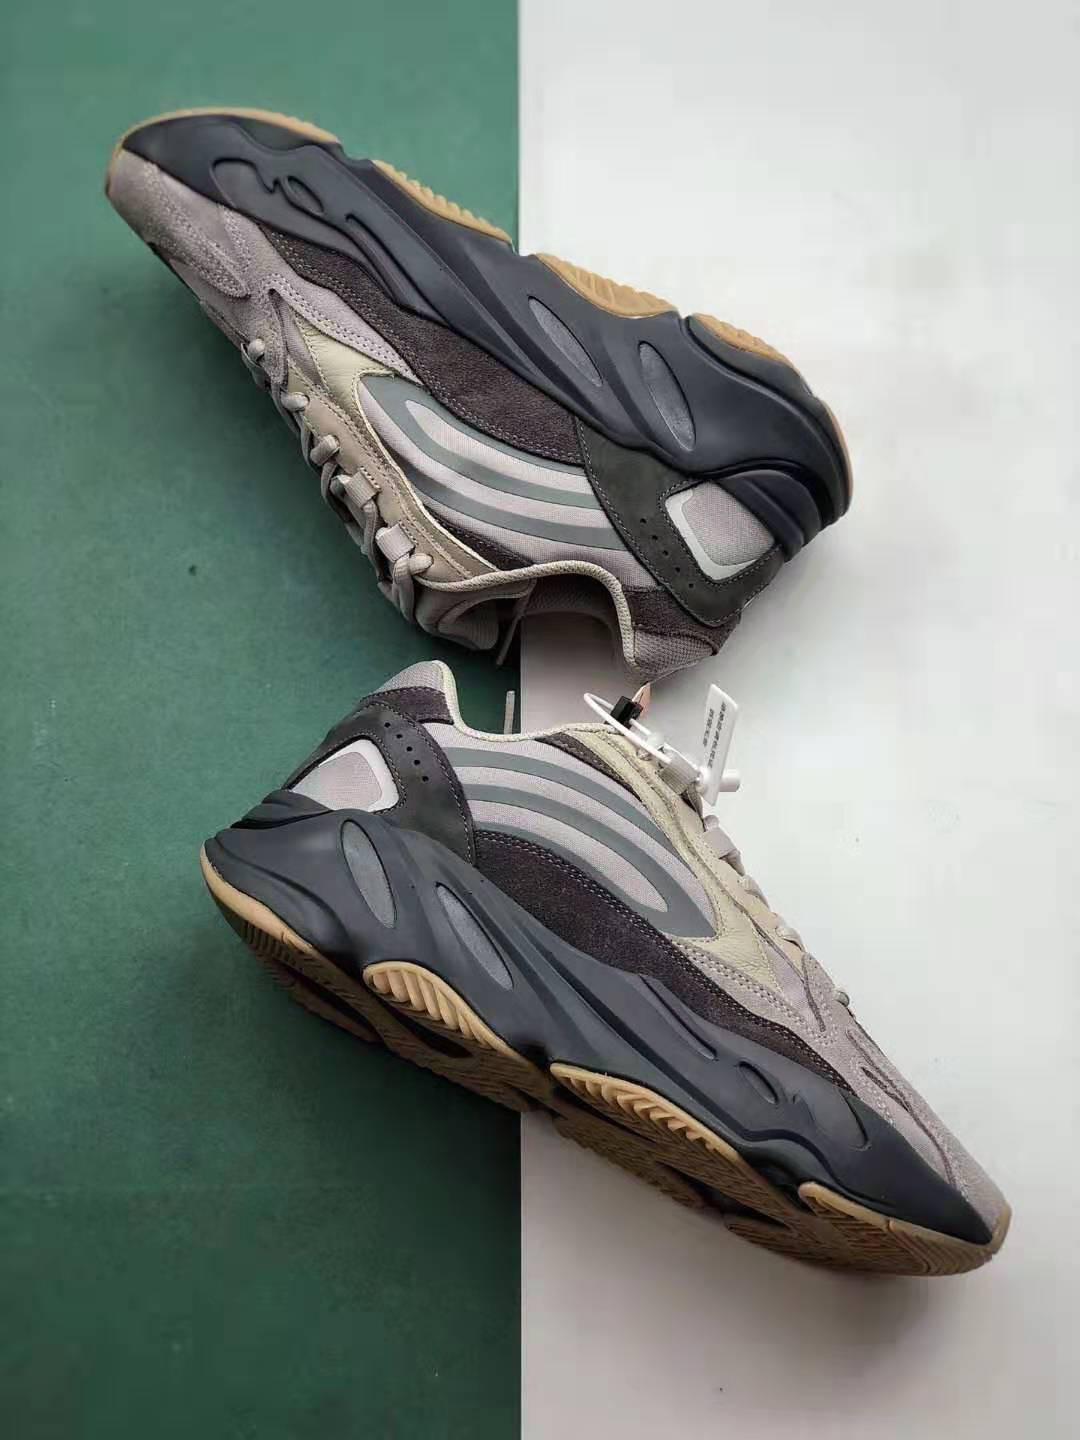 Adidas Yeezy Boost 700 V2 'Tephra' FU7914 - Shop the Latest Release